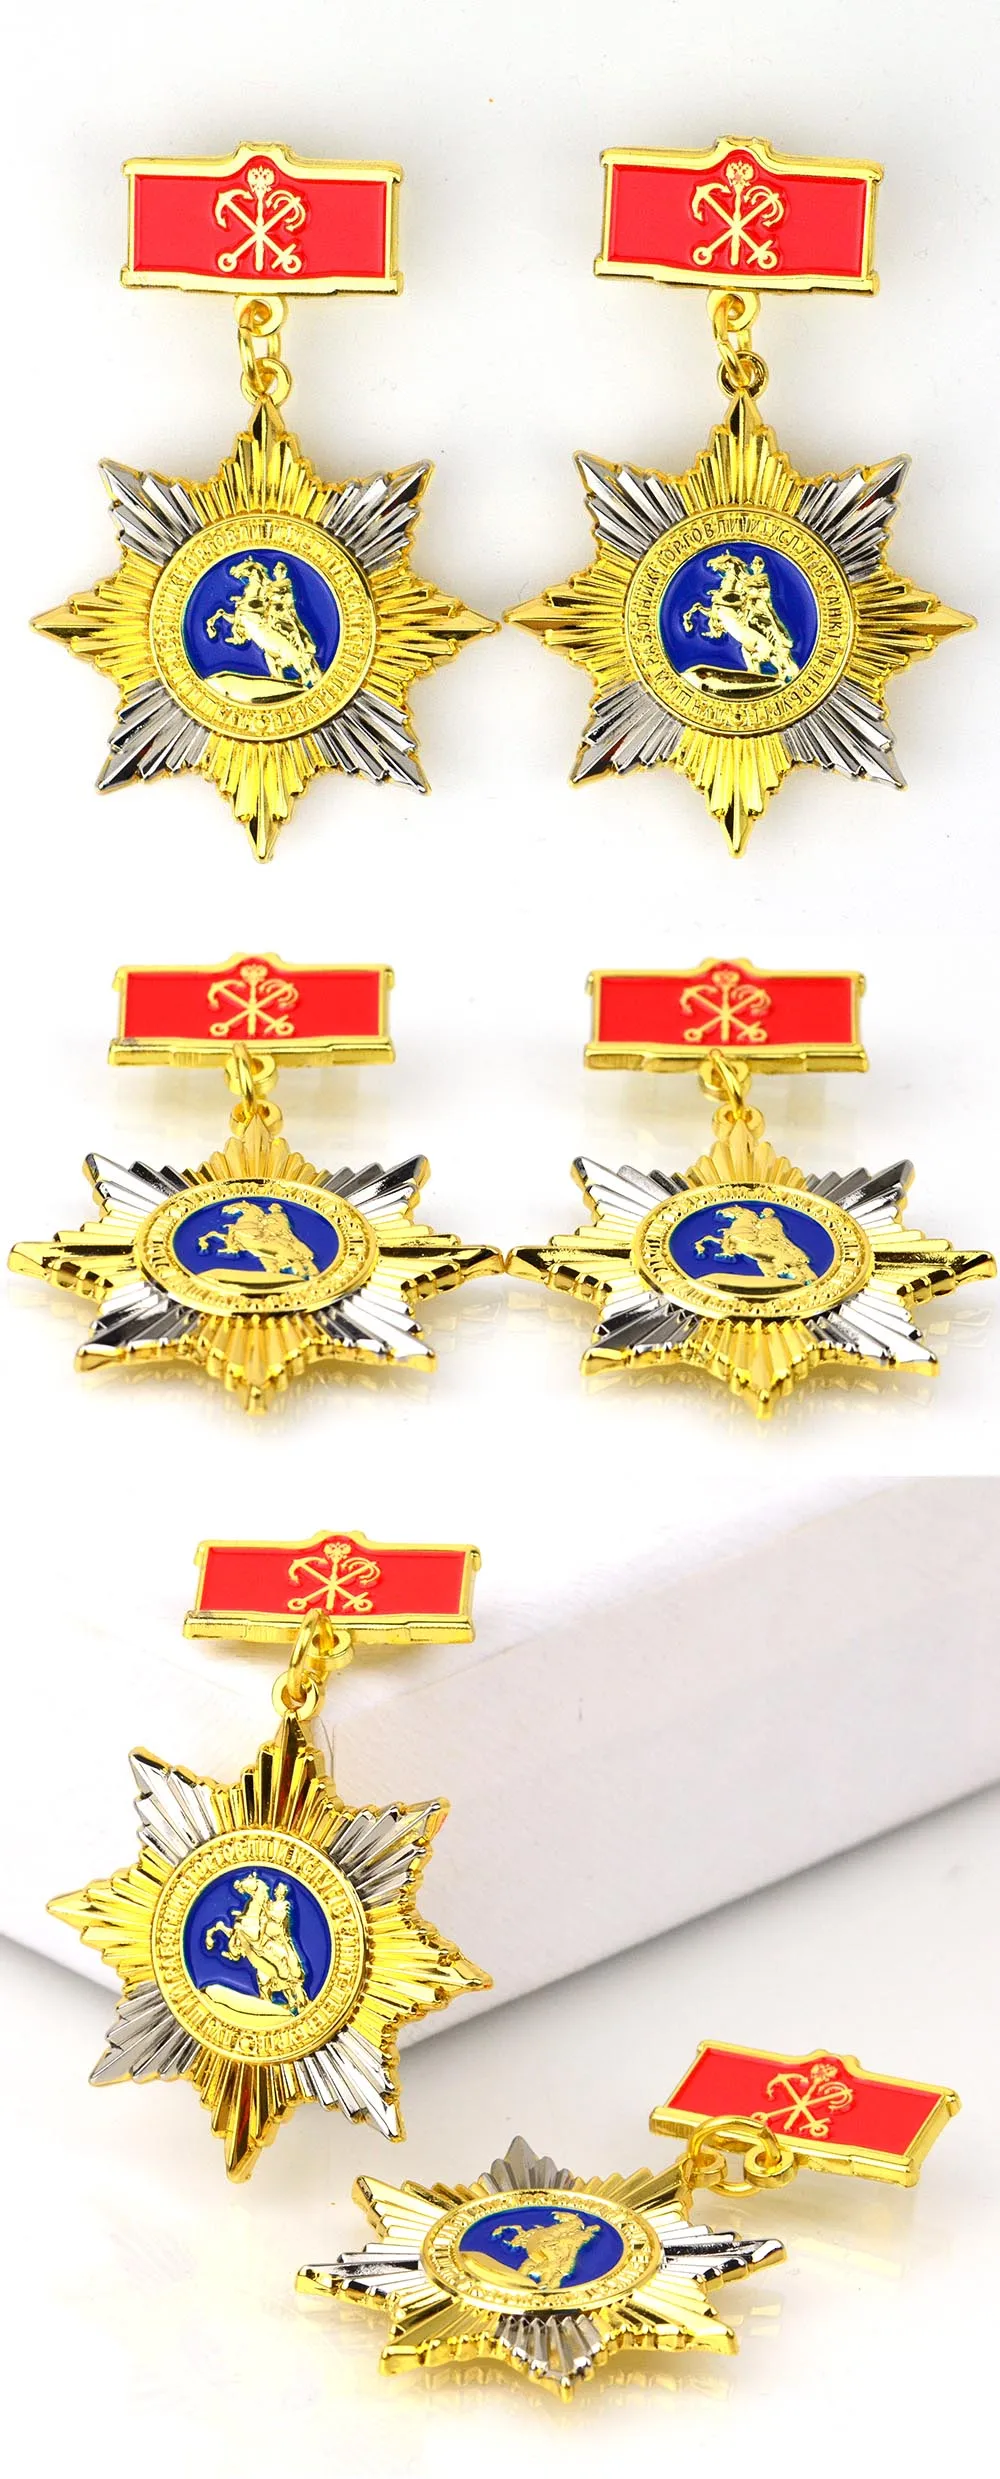 Manufactory production personalized souvenir award custom 3d military medal of honor